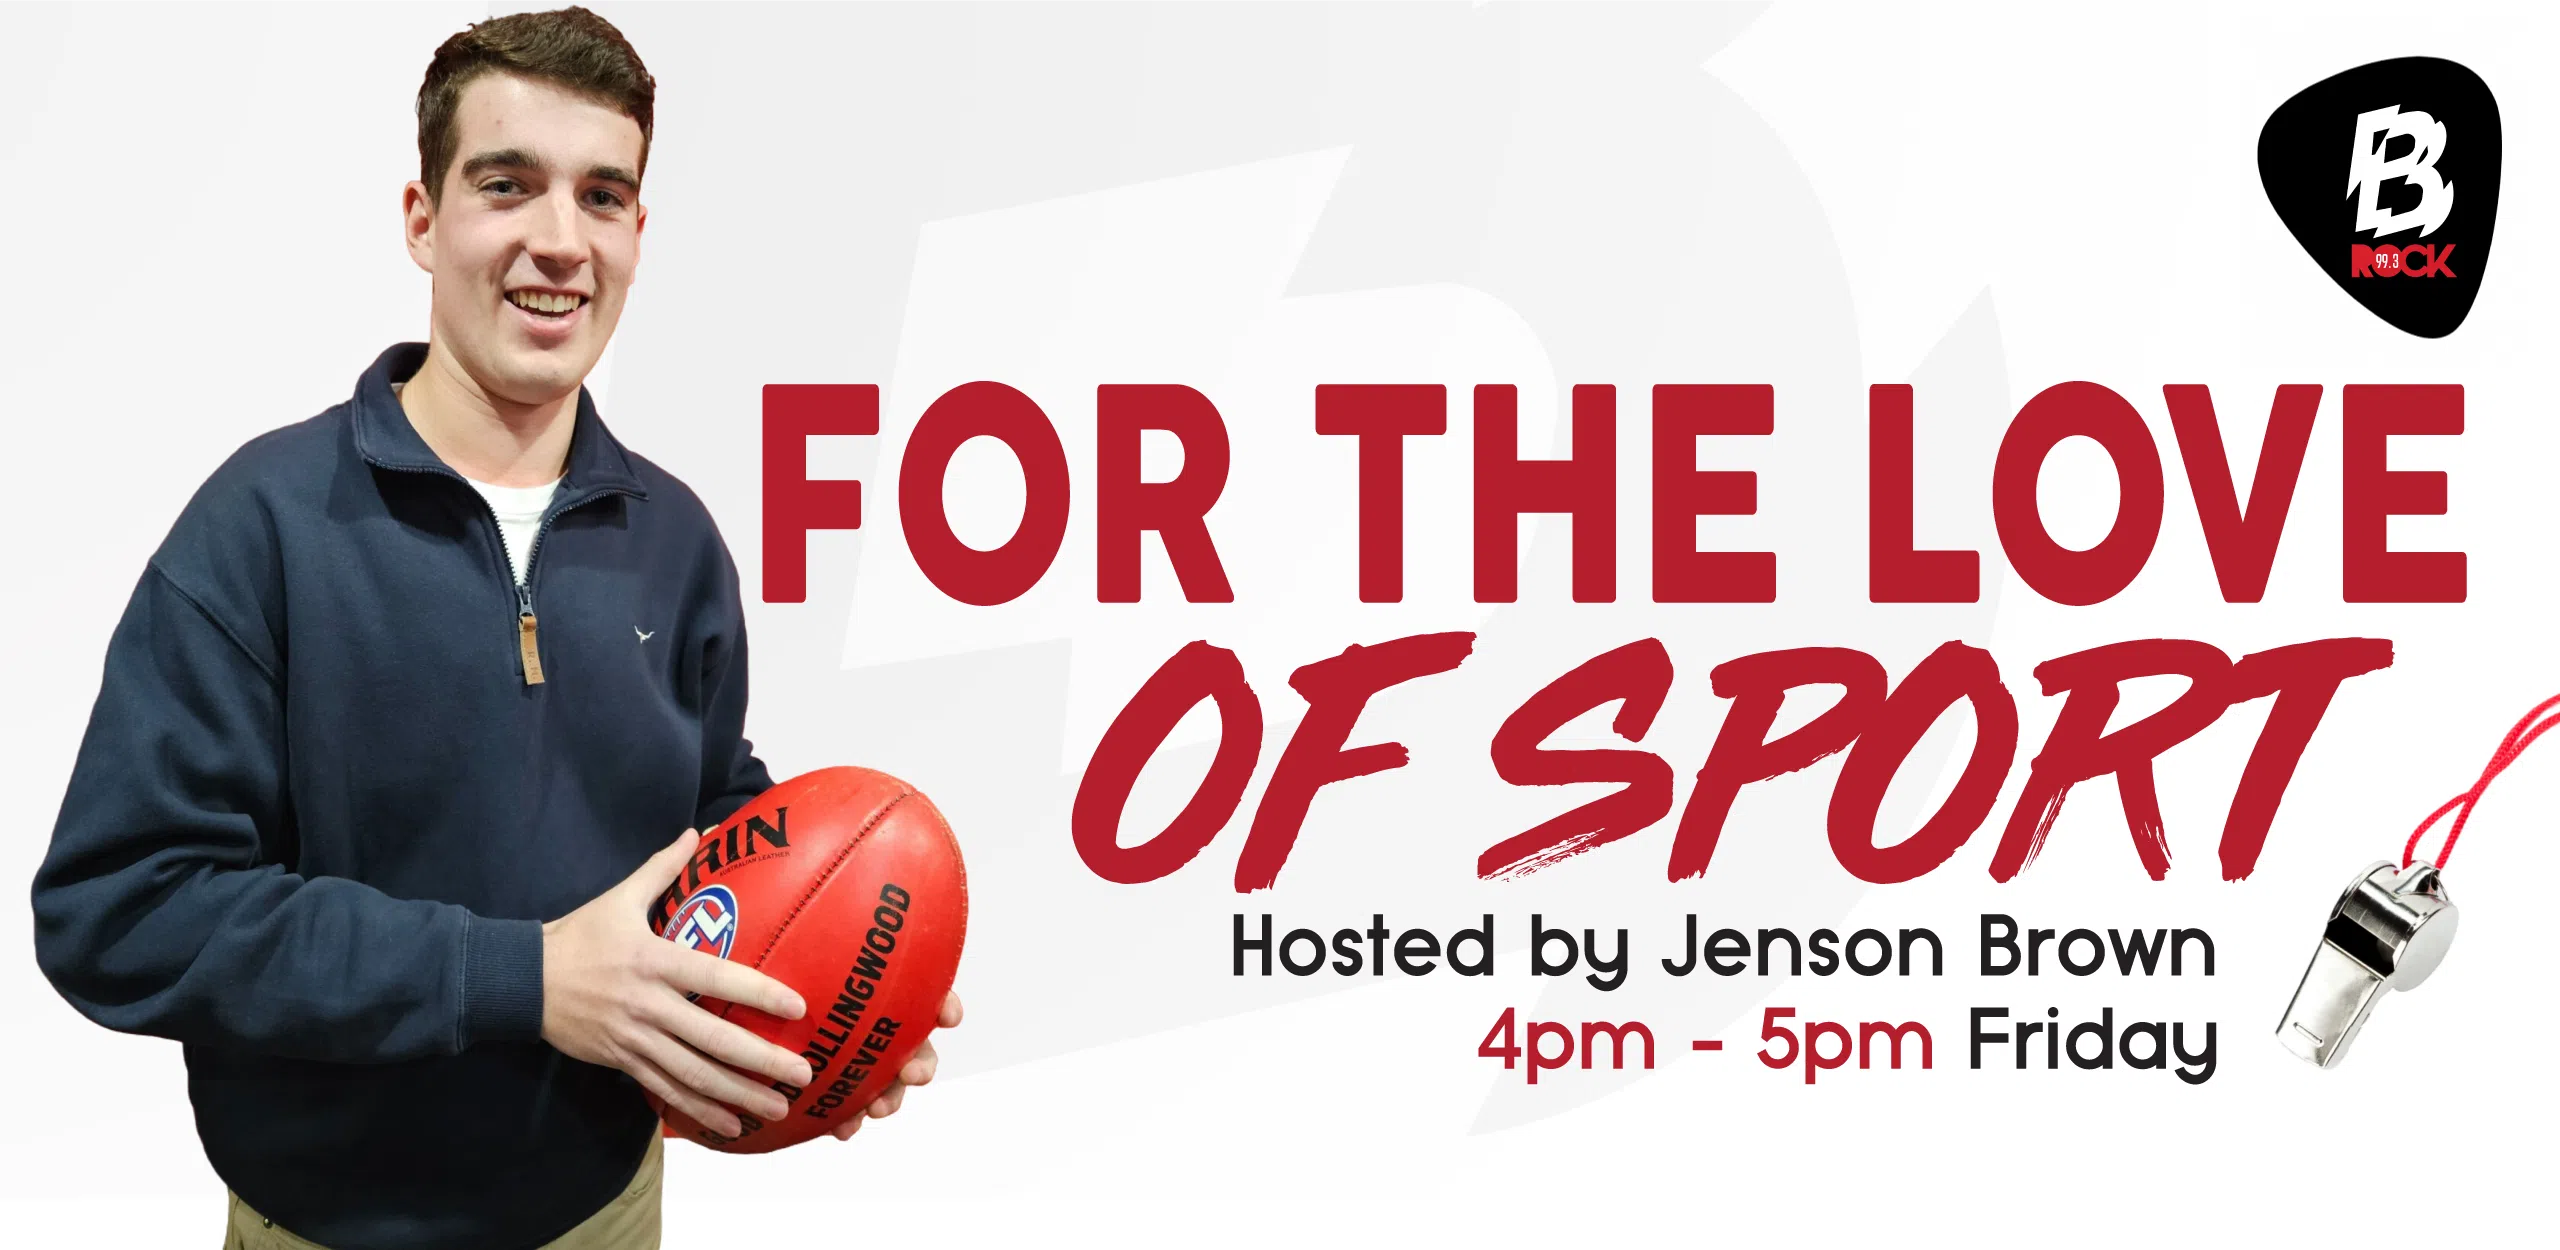 Feature: https://www.brockfm.com.au/for-the-love-of-sport/